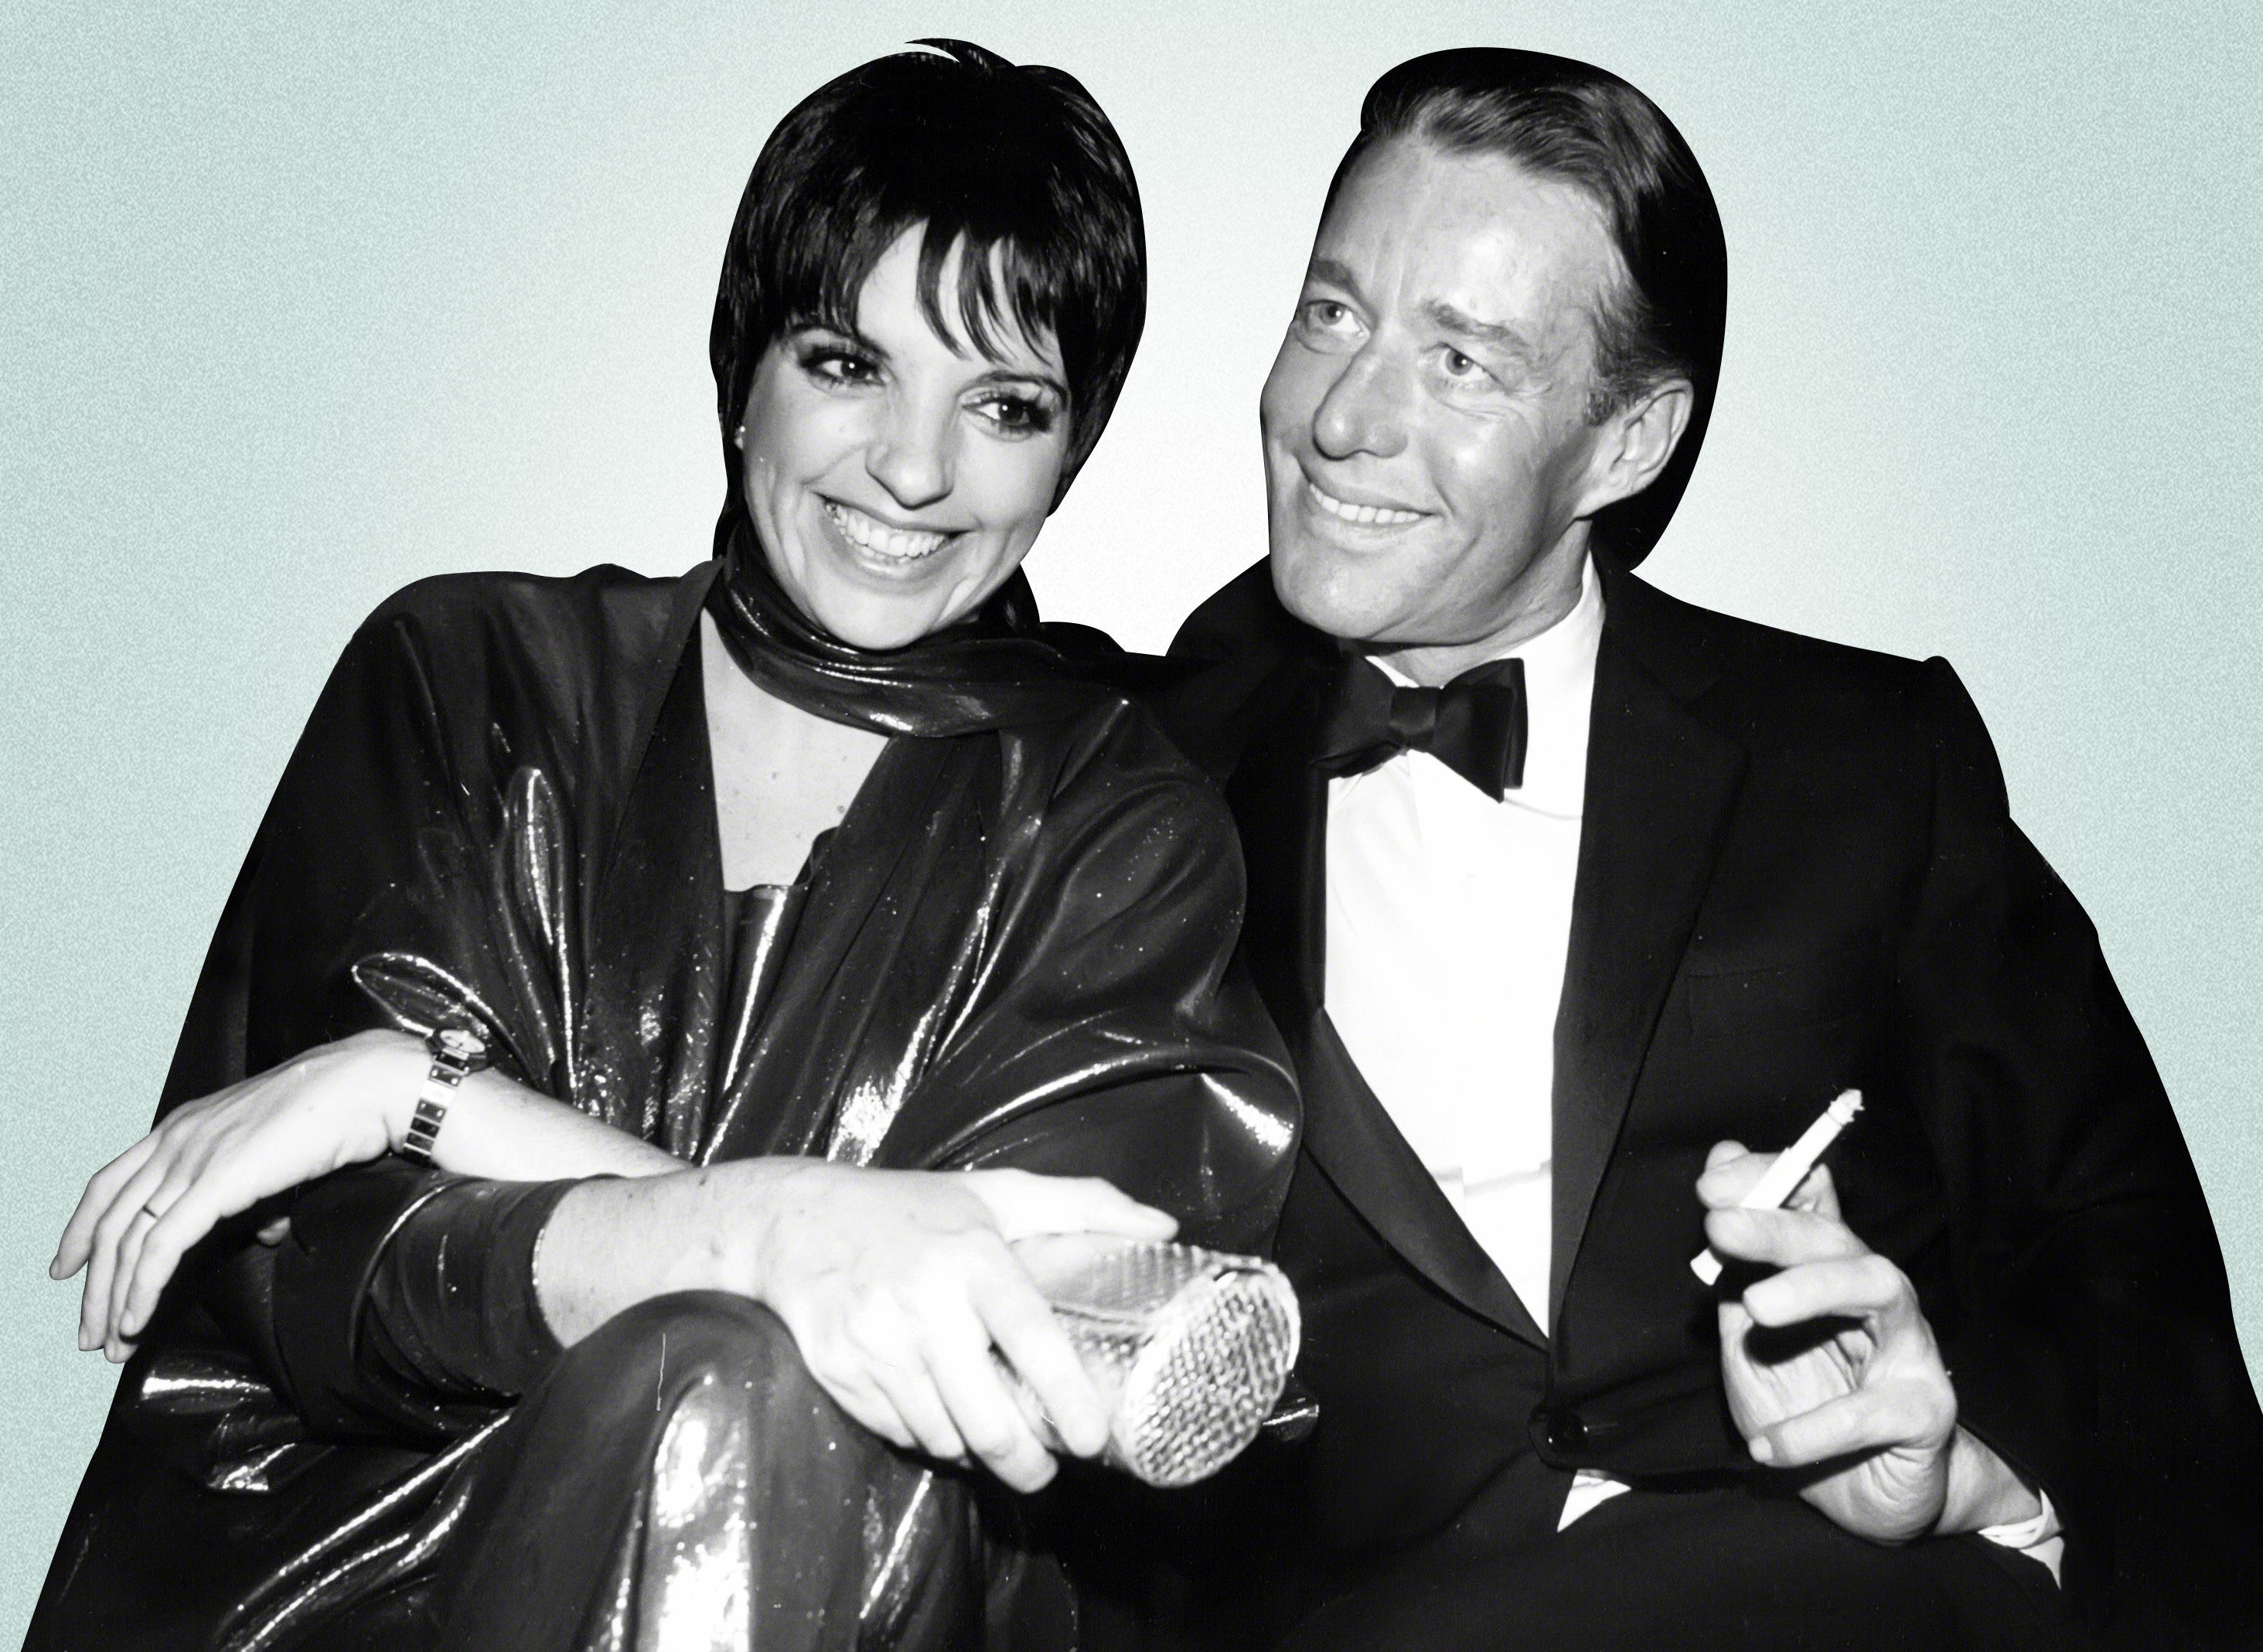 Best Friend Having Sex With The Dead Man S Wife During Funeral - Halston Studio 54 Vent Death True Story - Did Liza Minnelli Overdose in  Studio 54?